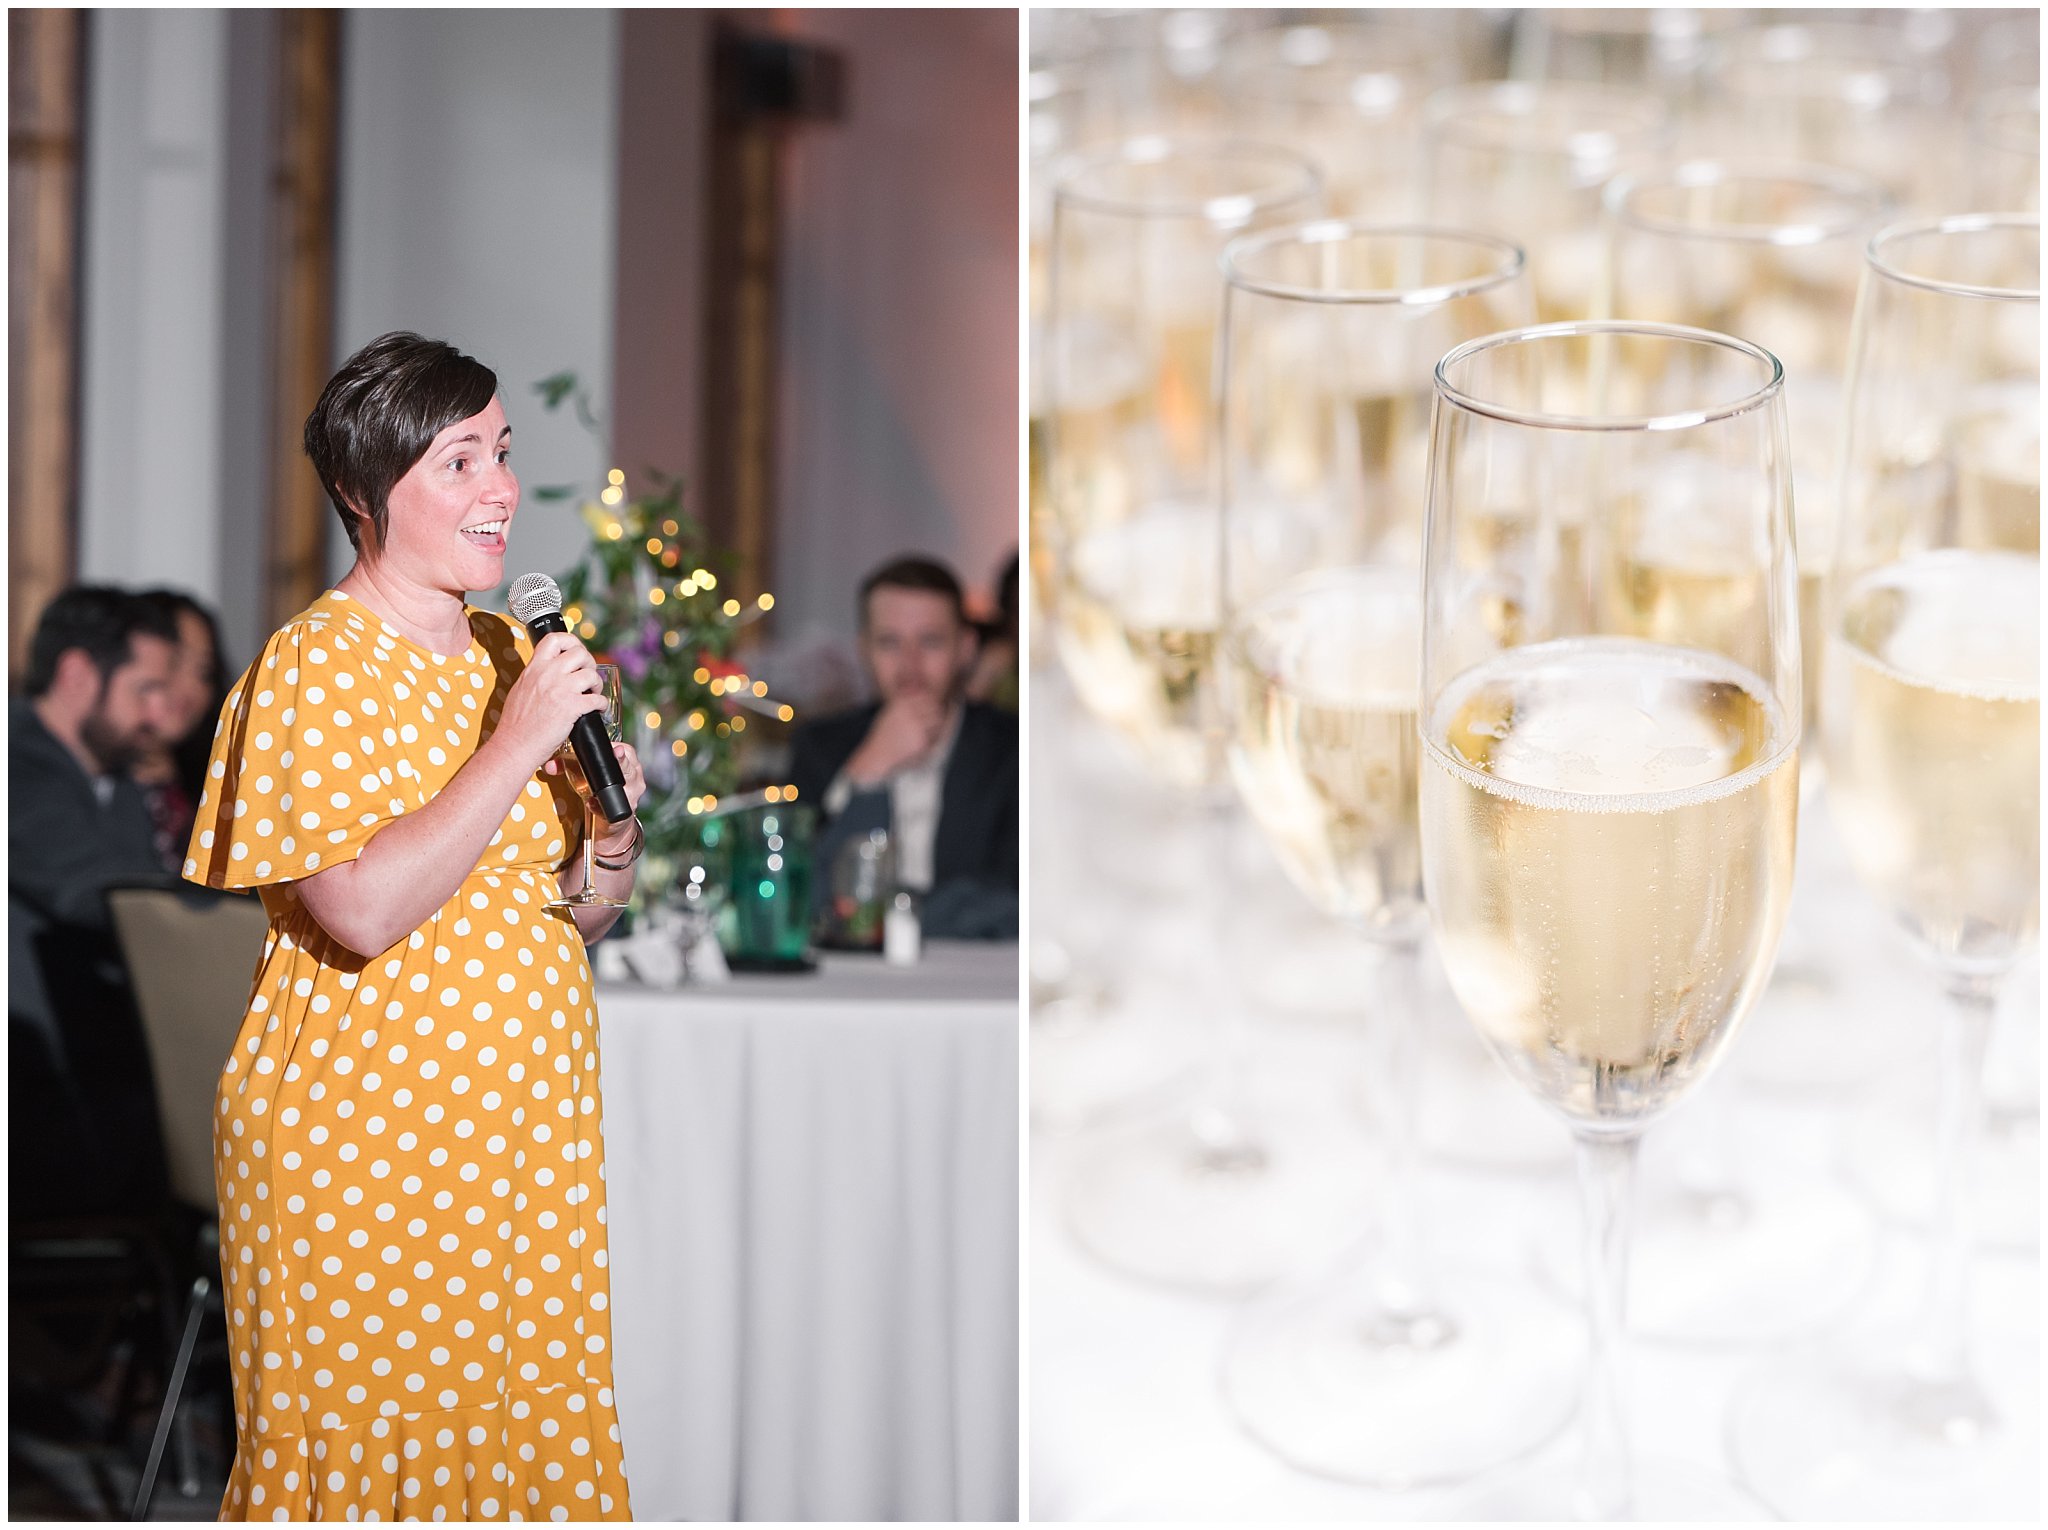 Toasts during wedding dinner and champagne glasses | Park City Wedding at the Hyatt Centric | Jessie and Dallin Photography